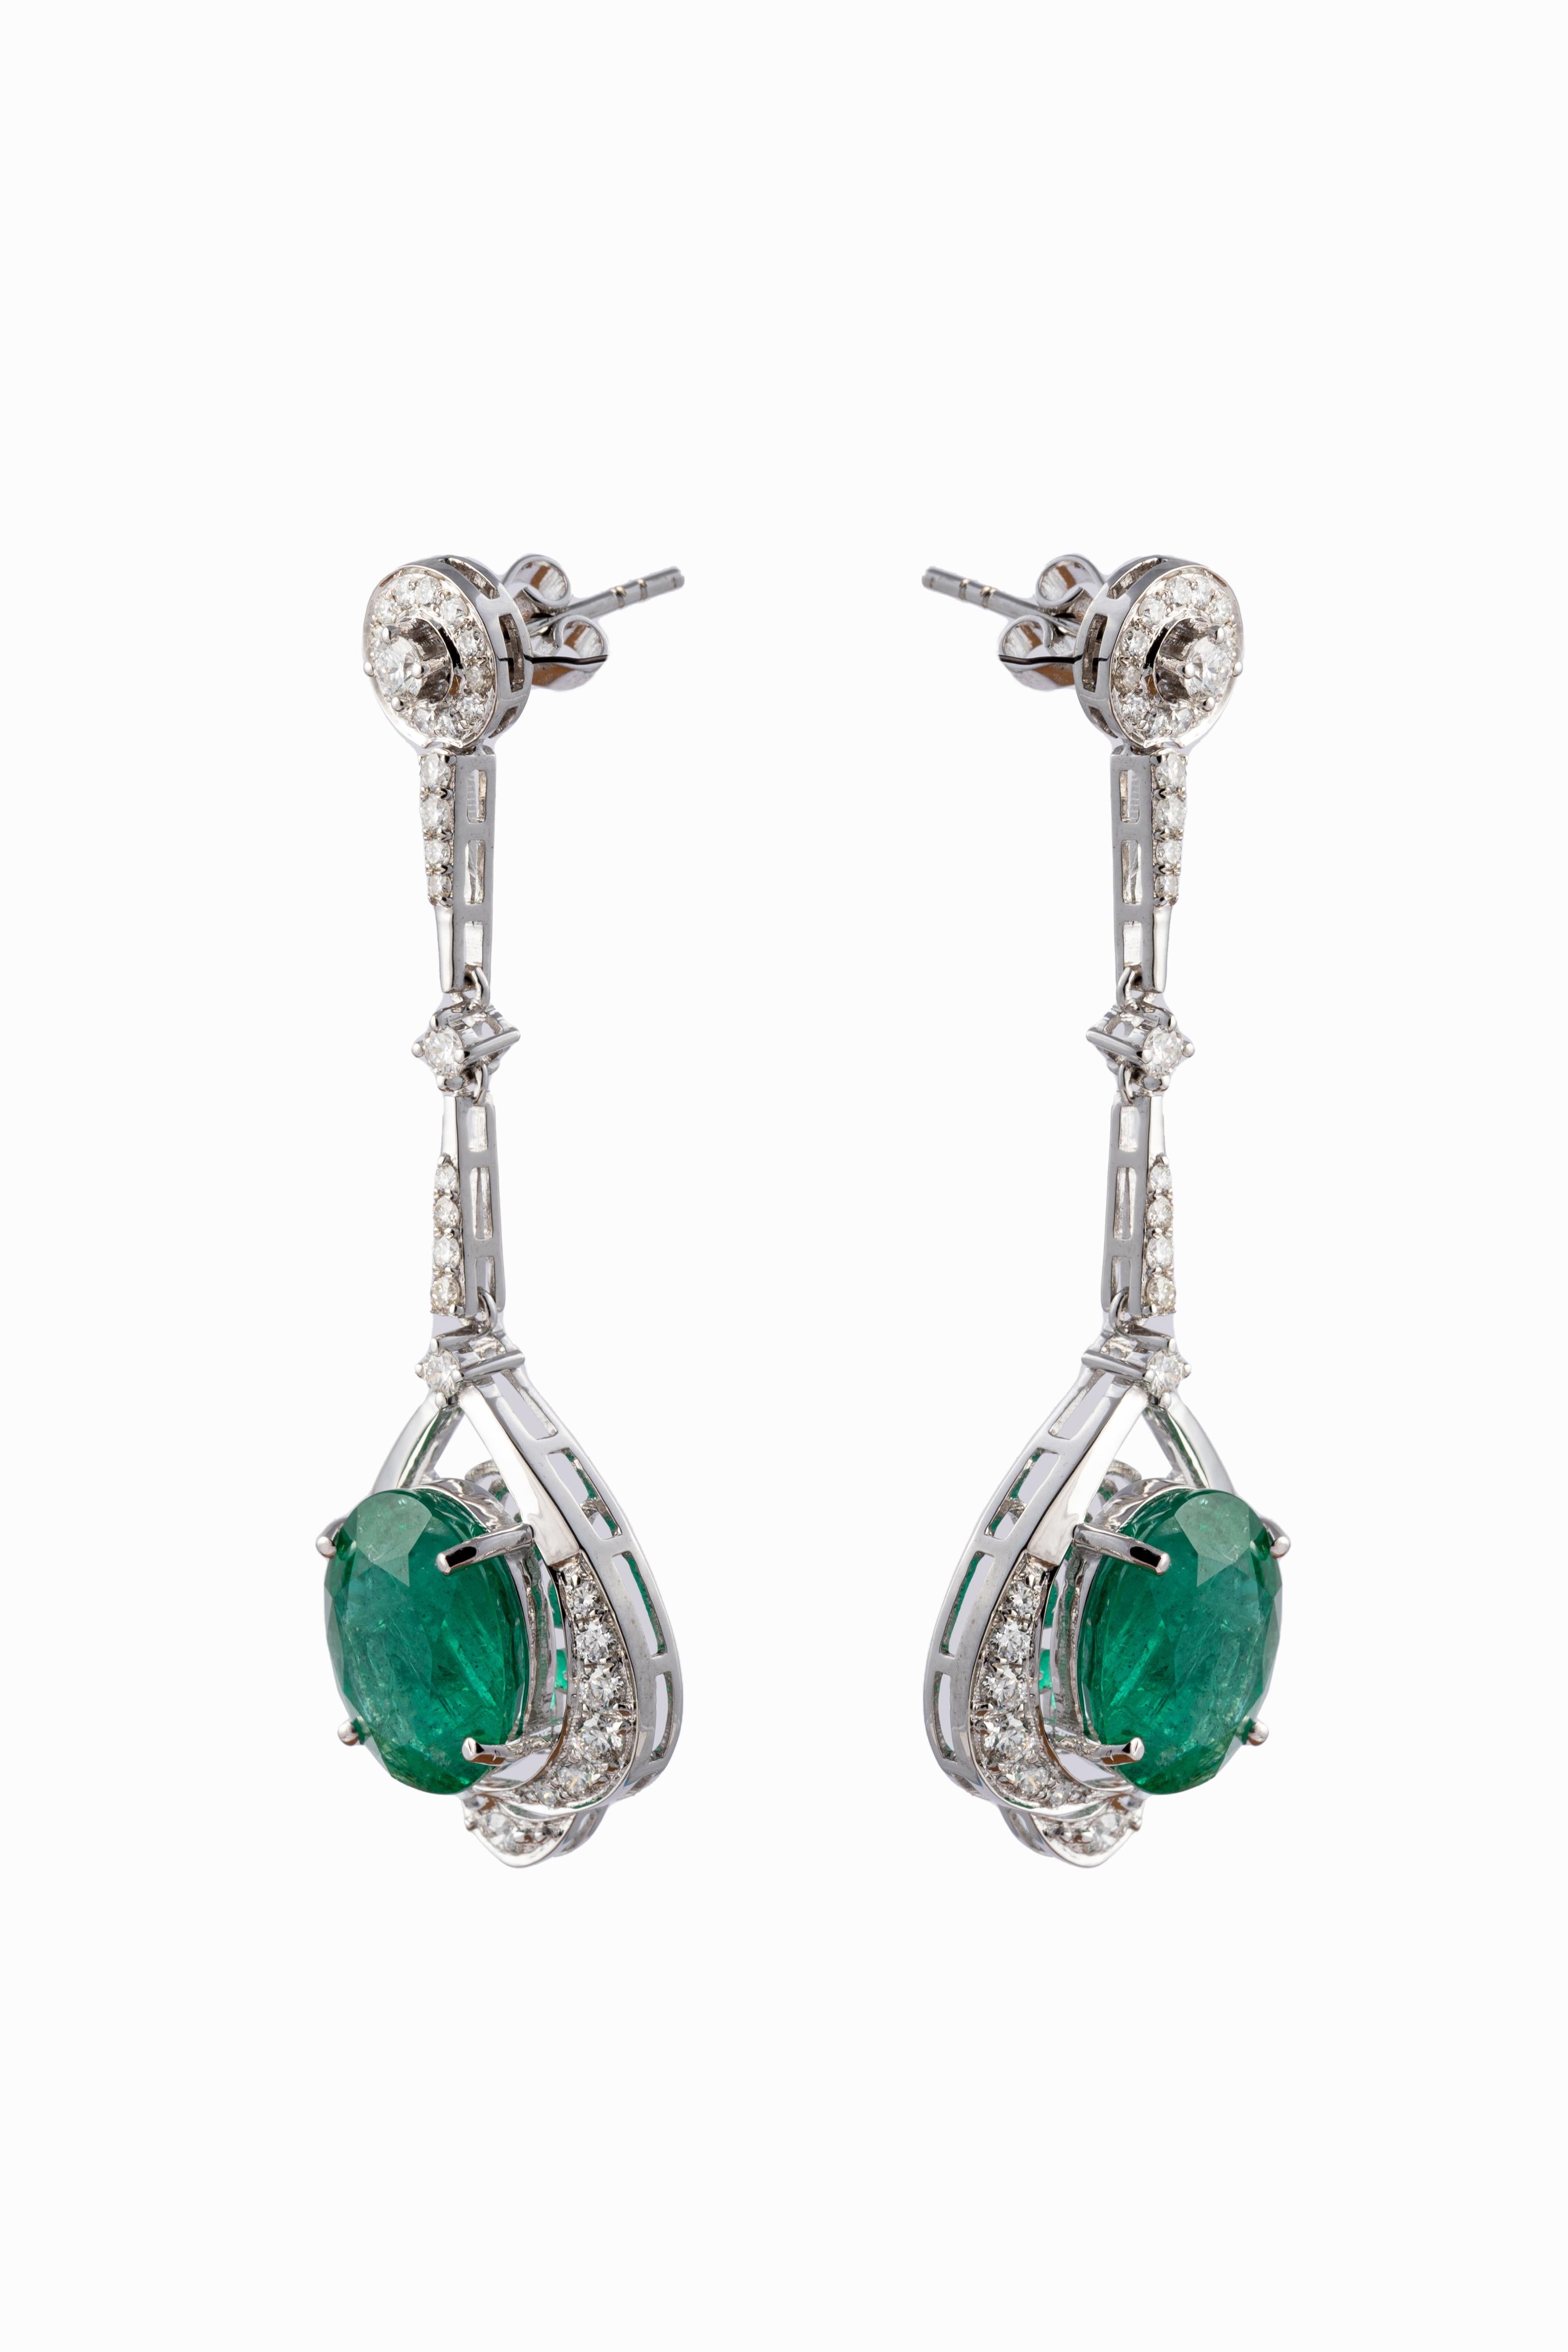 Emerald Cut Natural Zambian Emerald Earrings with Diamonds and 14k Gold For Sale